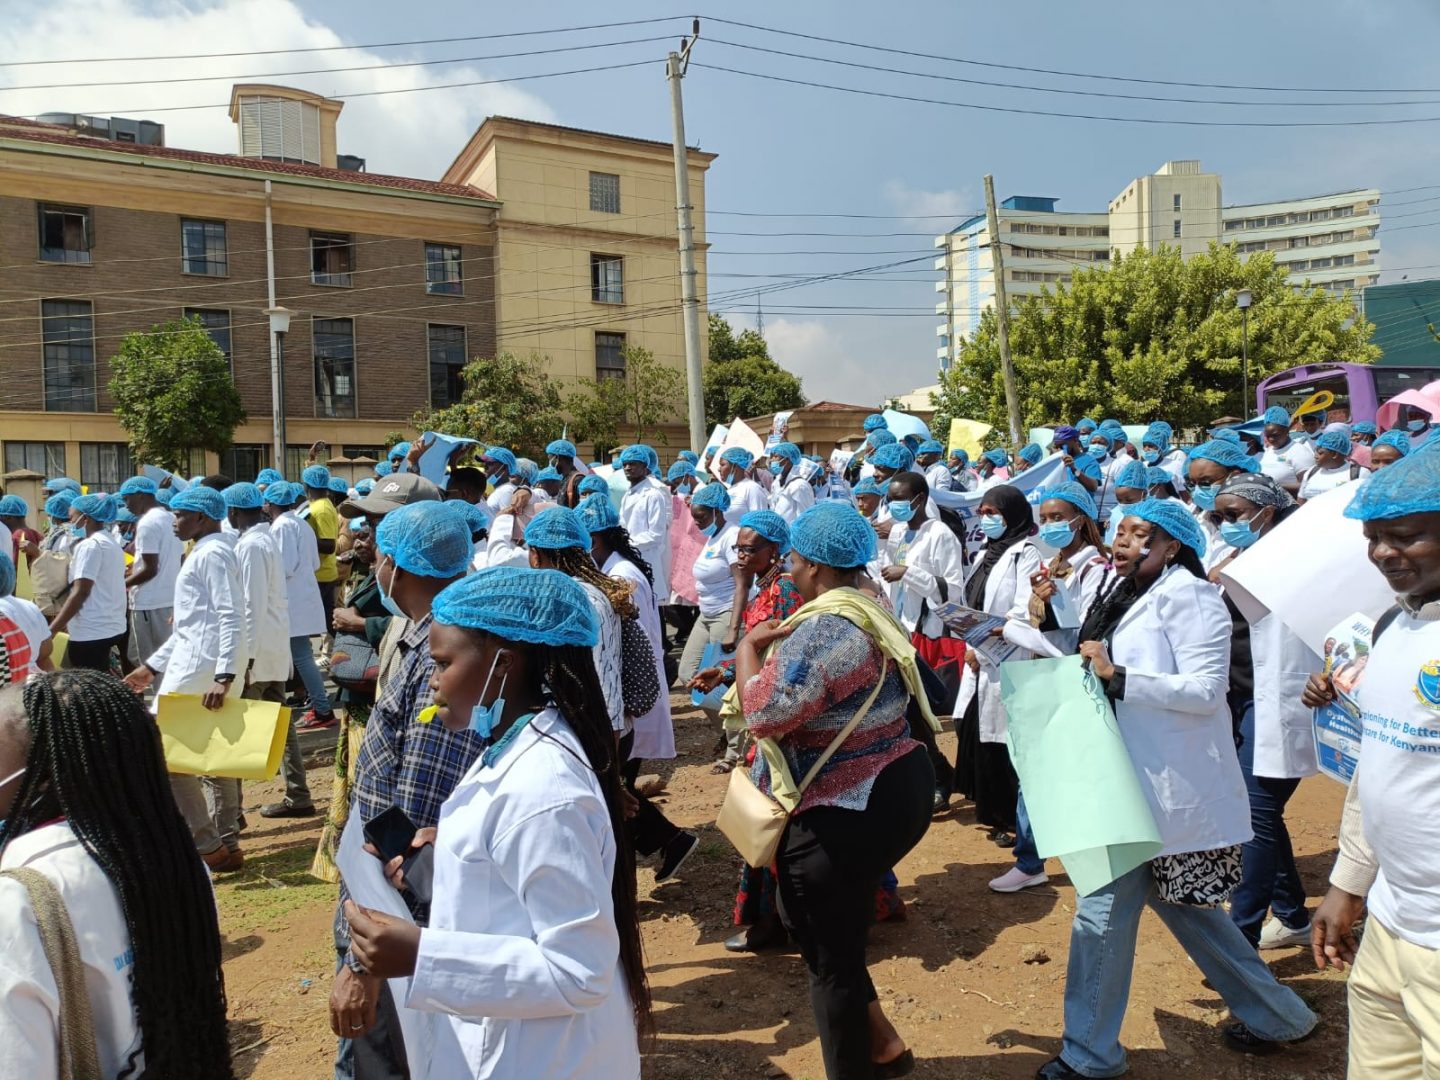 KMPDU Holds Peaceful Protests to Raise Issues of Not Getting Jobs